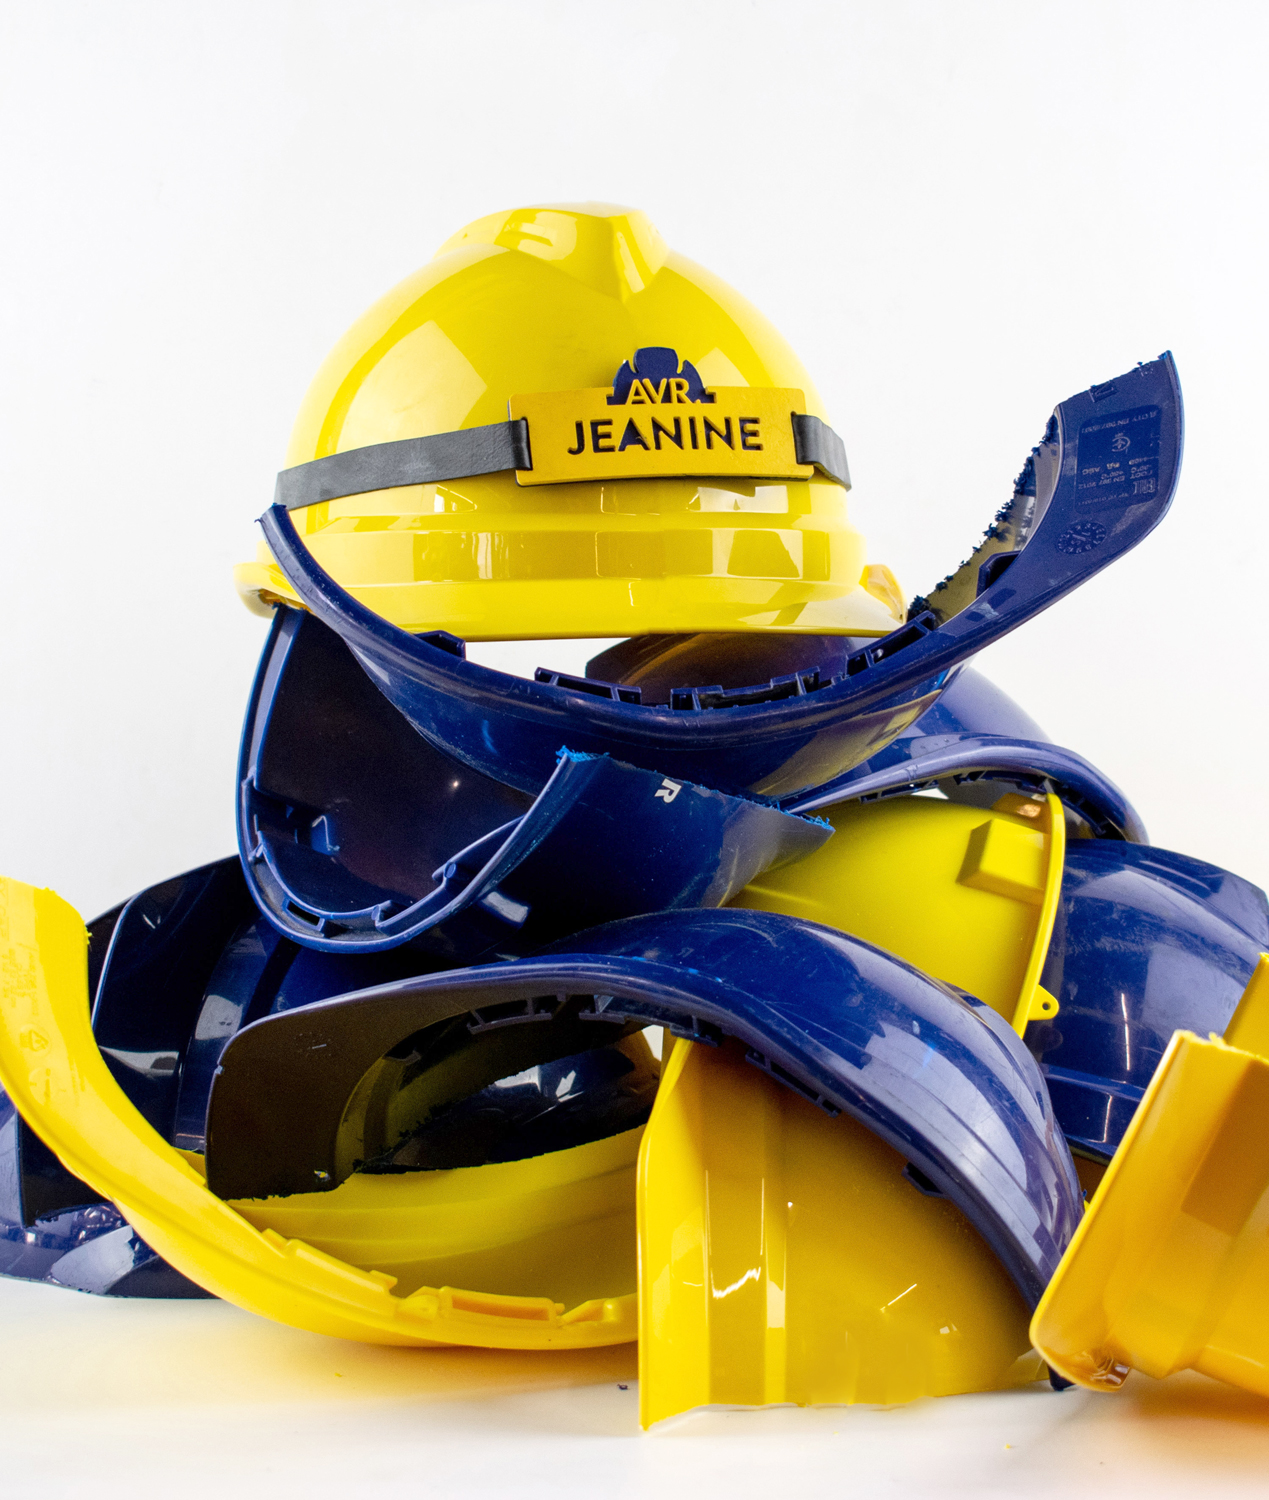 AVR – Safety helmet to name tag